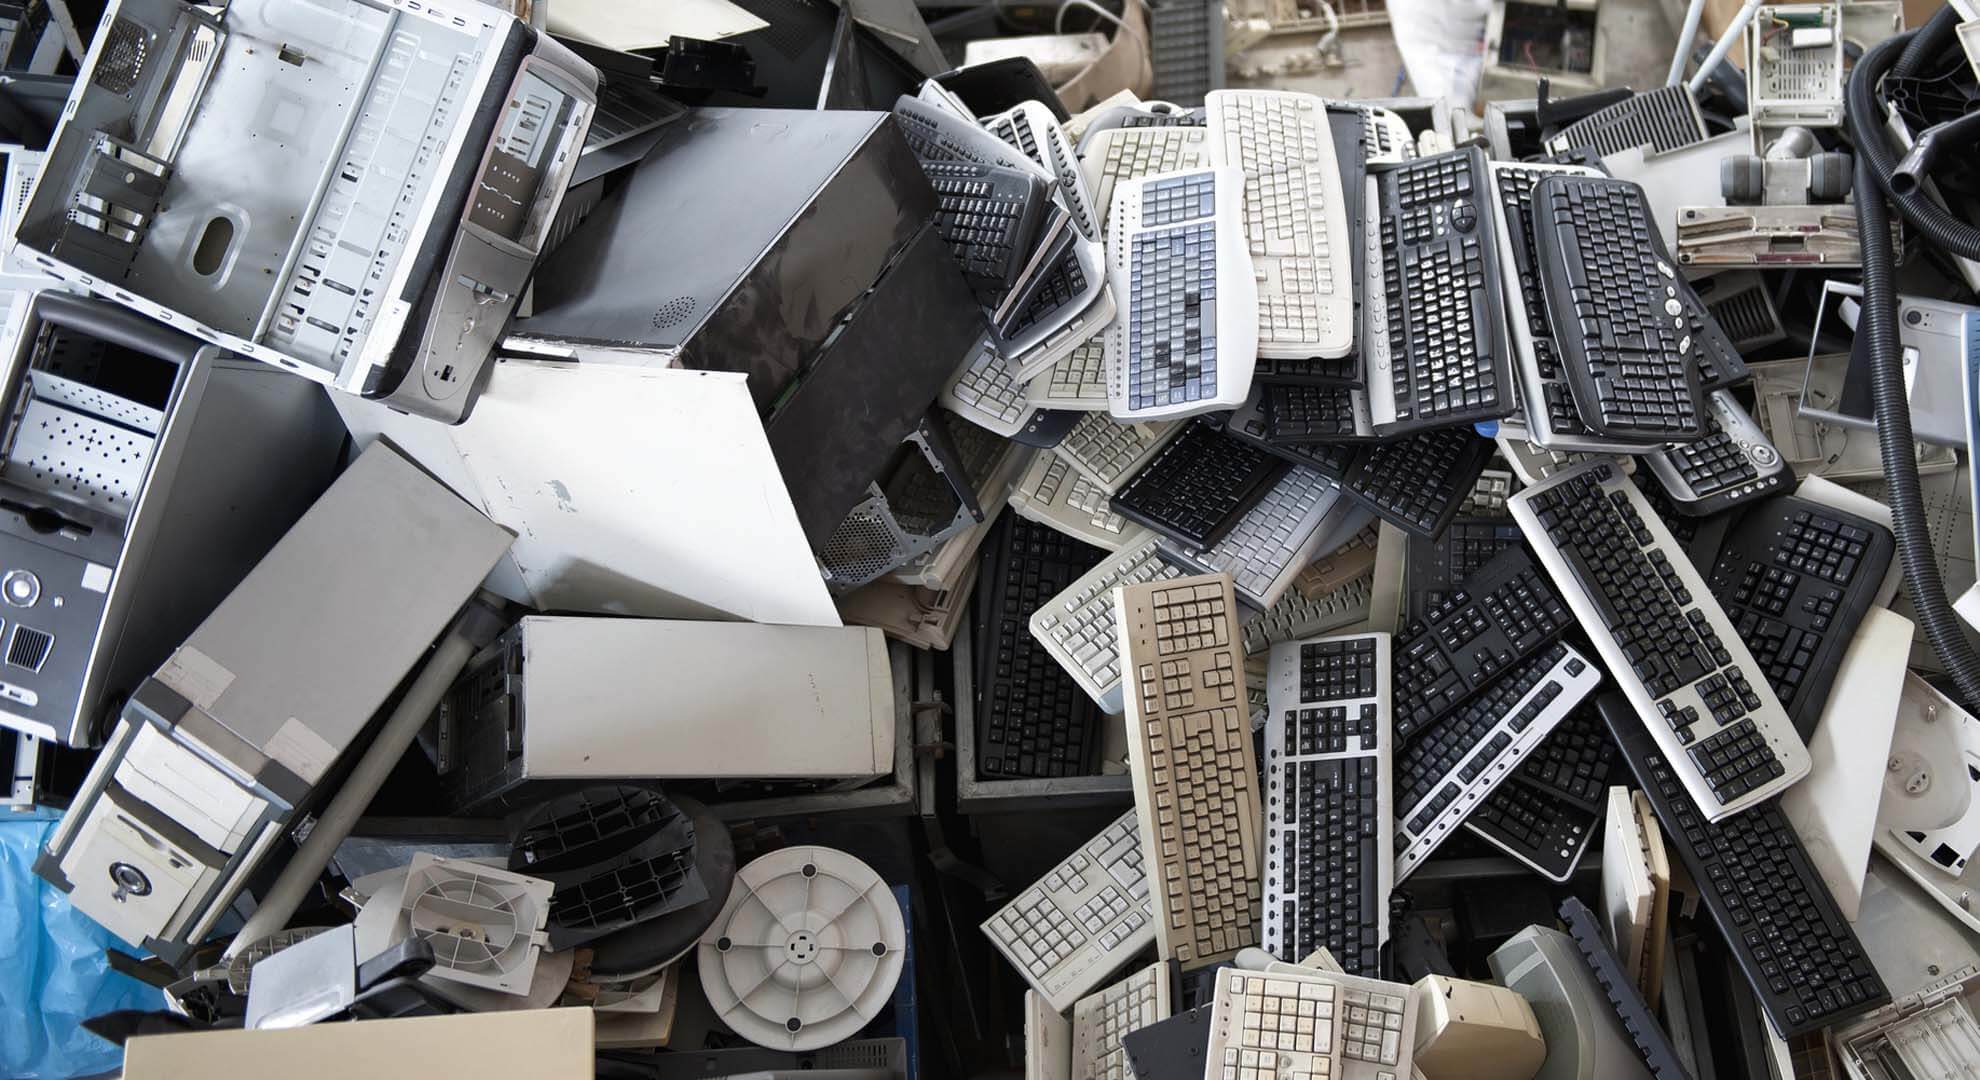 A large pile of old and broken computer equipment